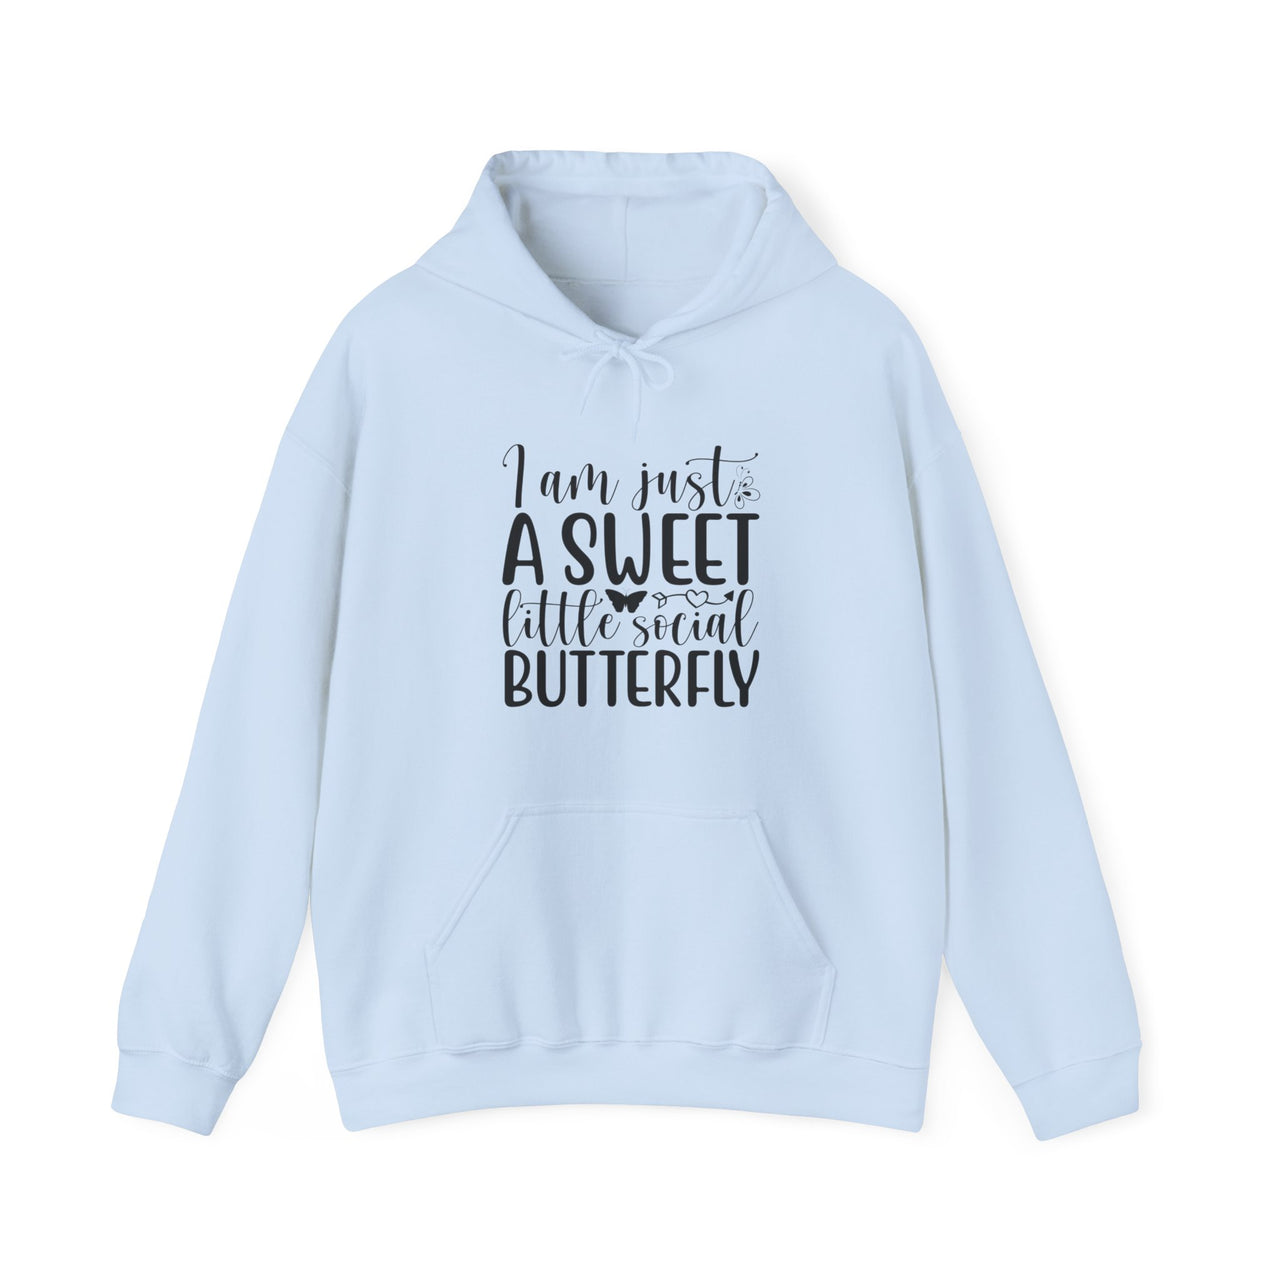 I'm just a sweet little social butterfly Cozy Hoodie